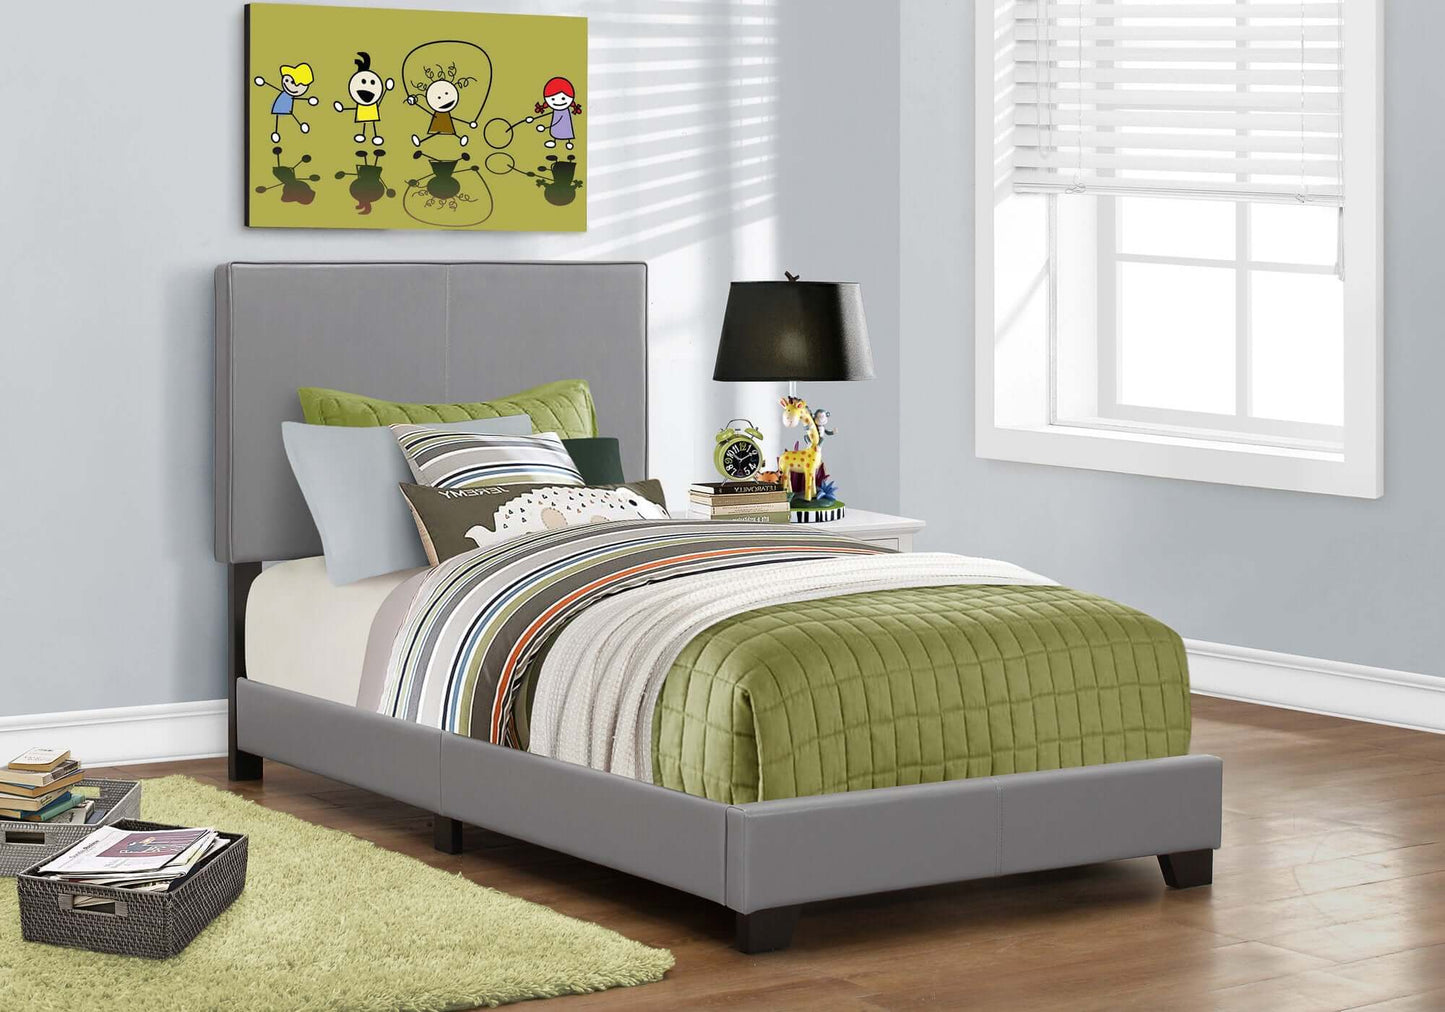 Monarch Specialties - Transitional Upholstered Twin Size Bed in Grey Leather-Look - I 5912T